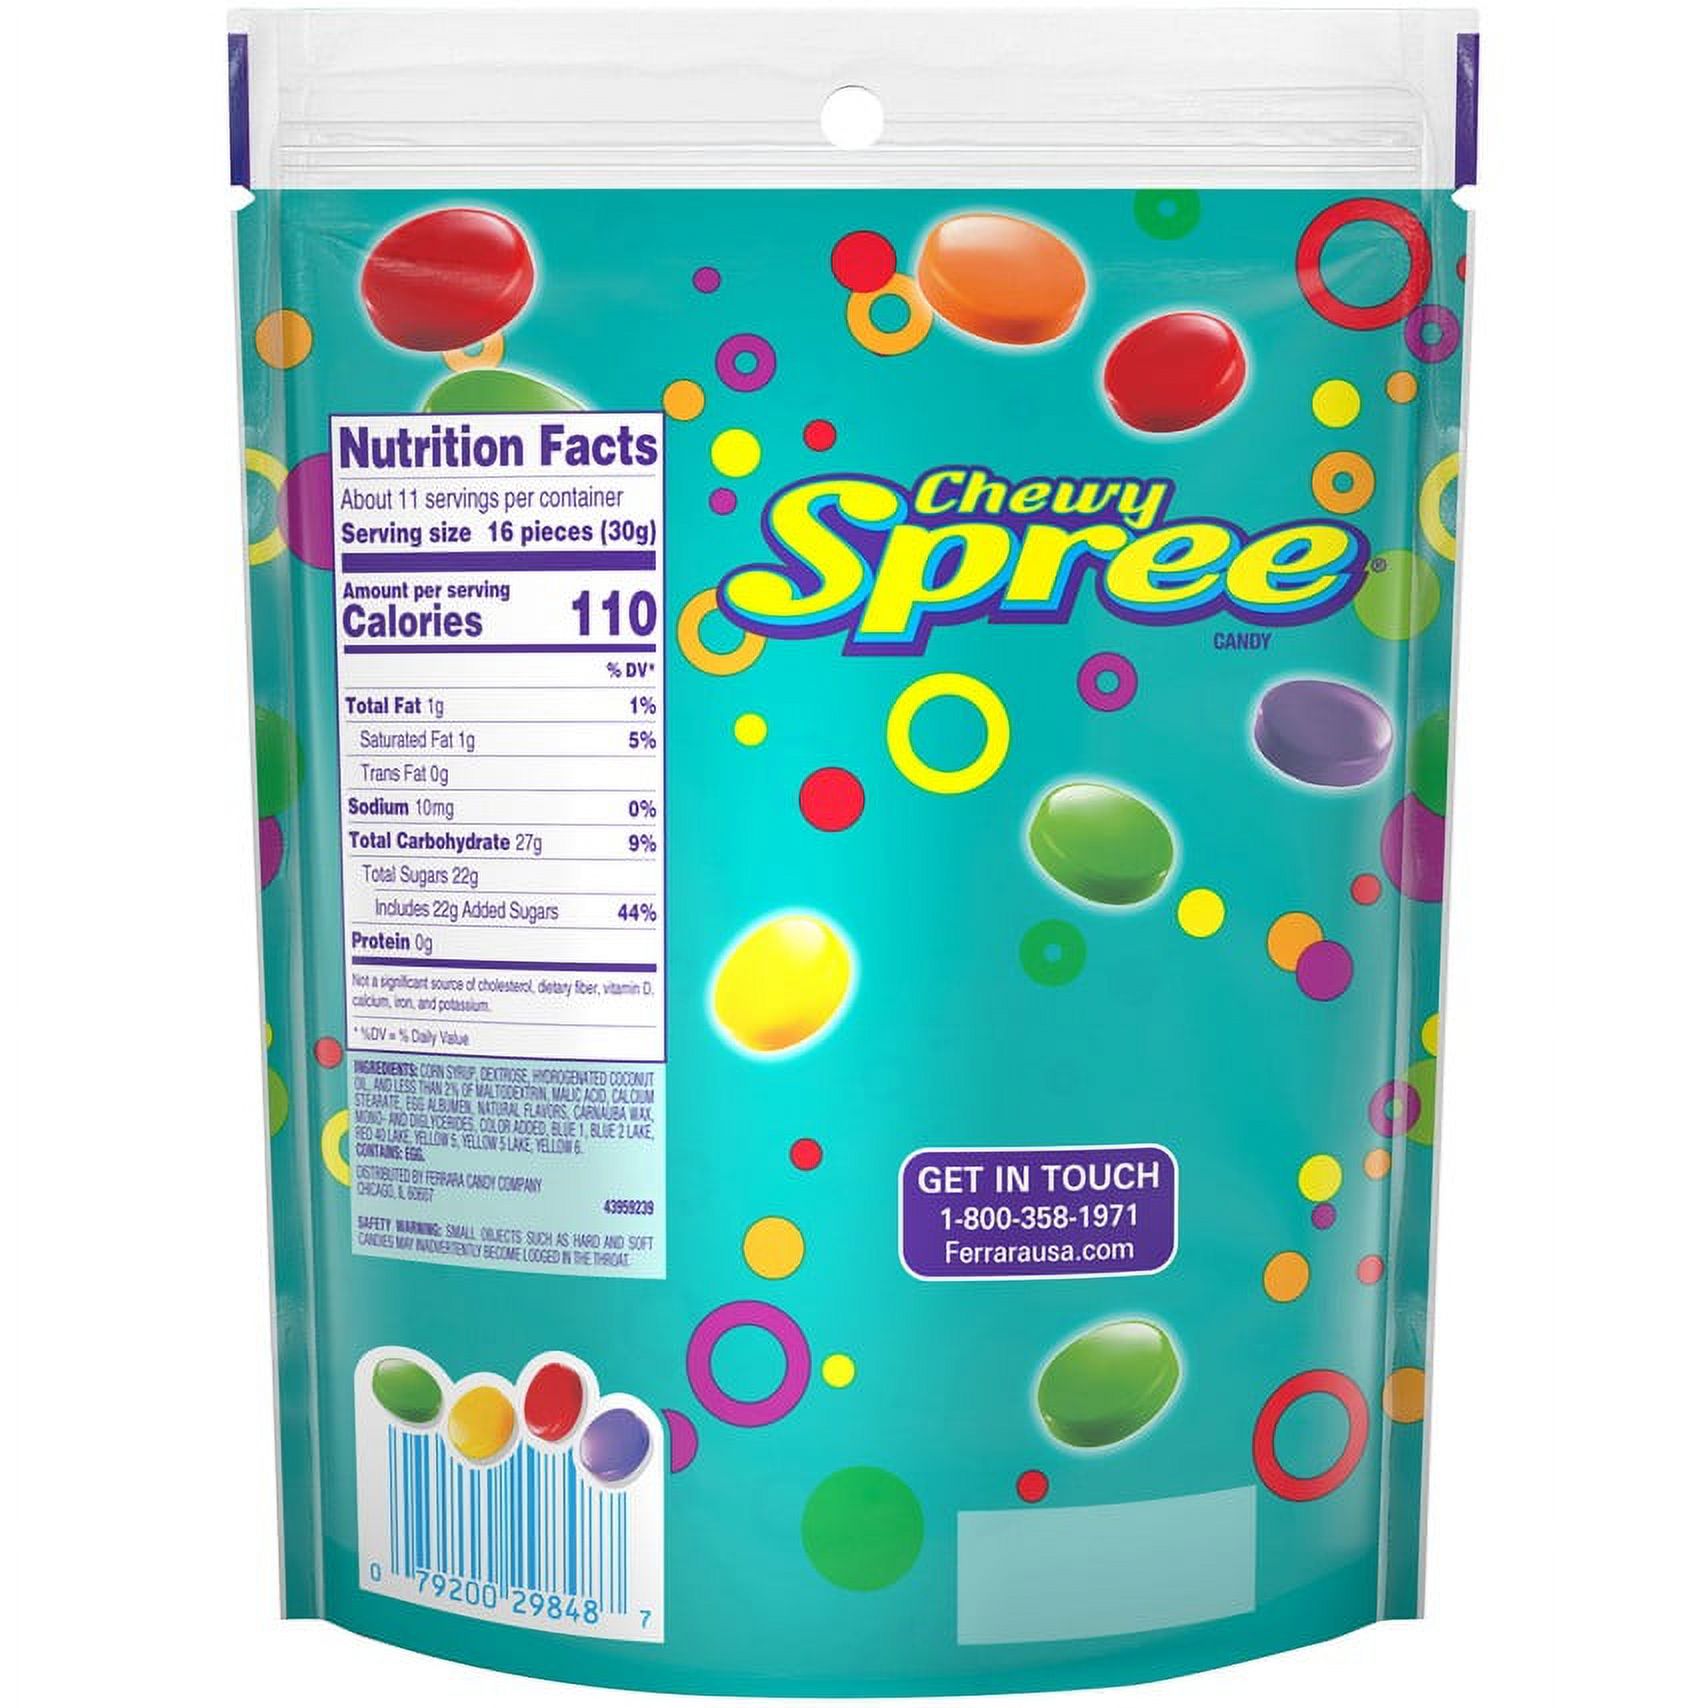 Spree Chewy Candy Bag, 12 oz - image 5 of 7